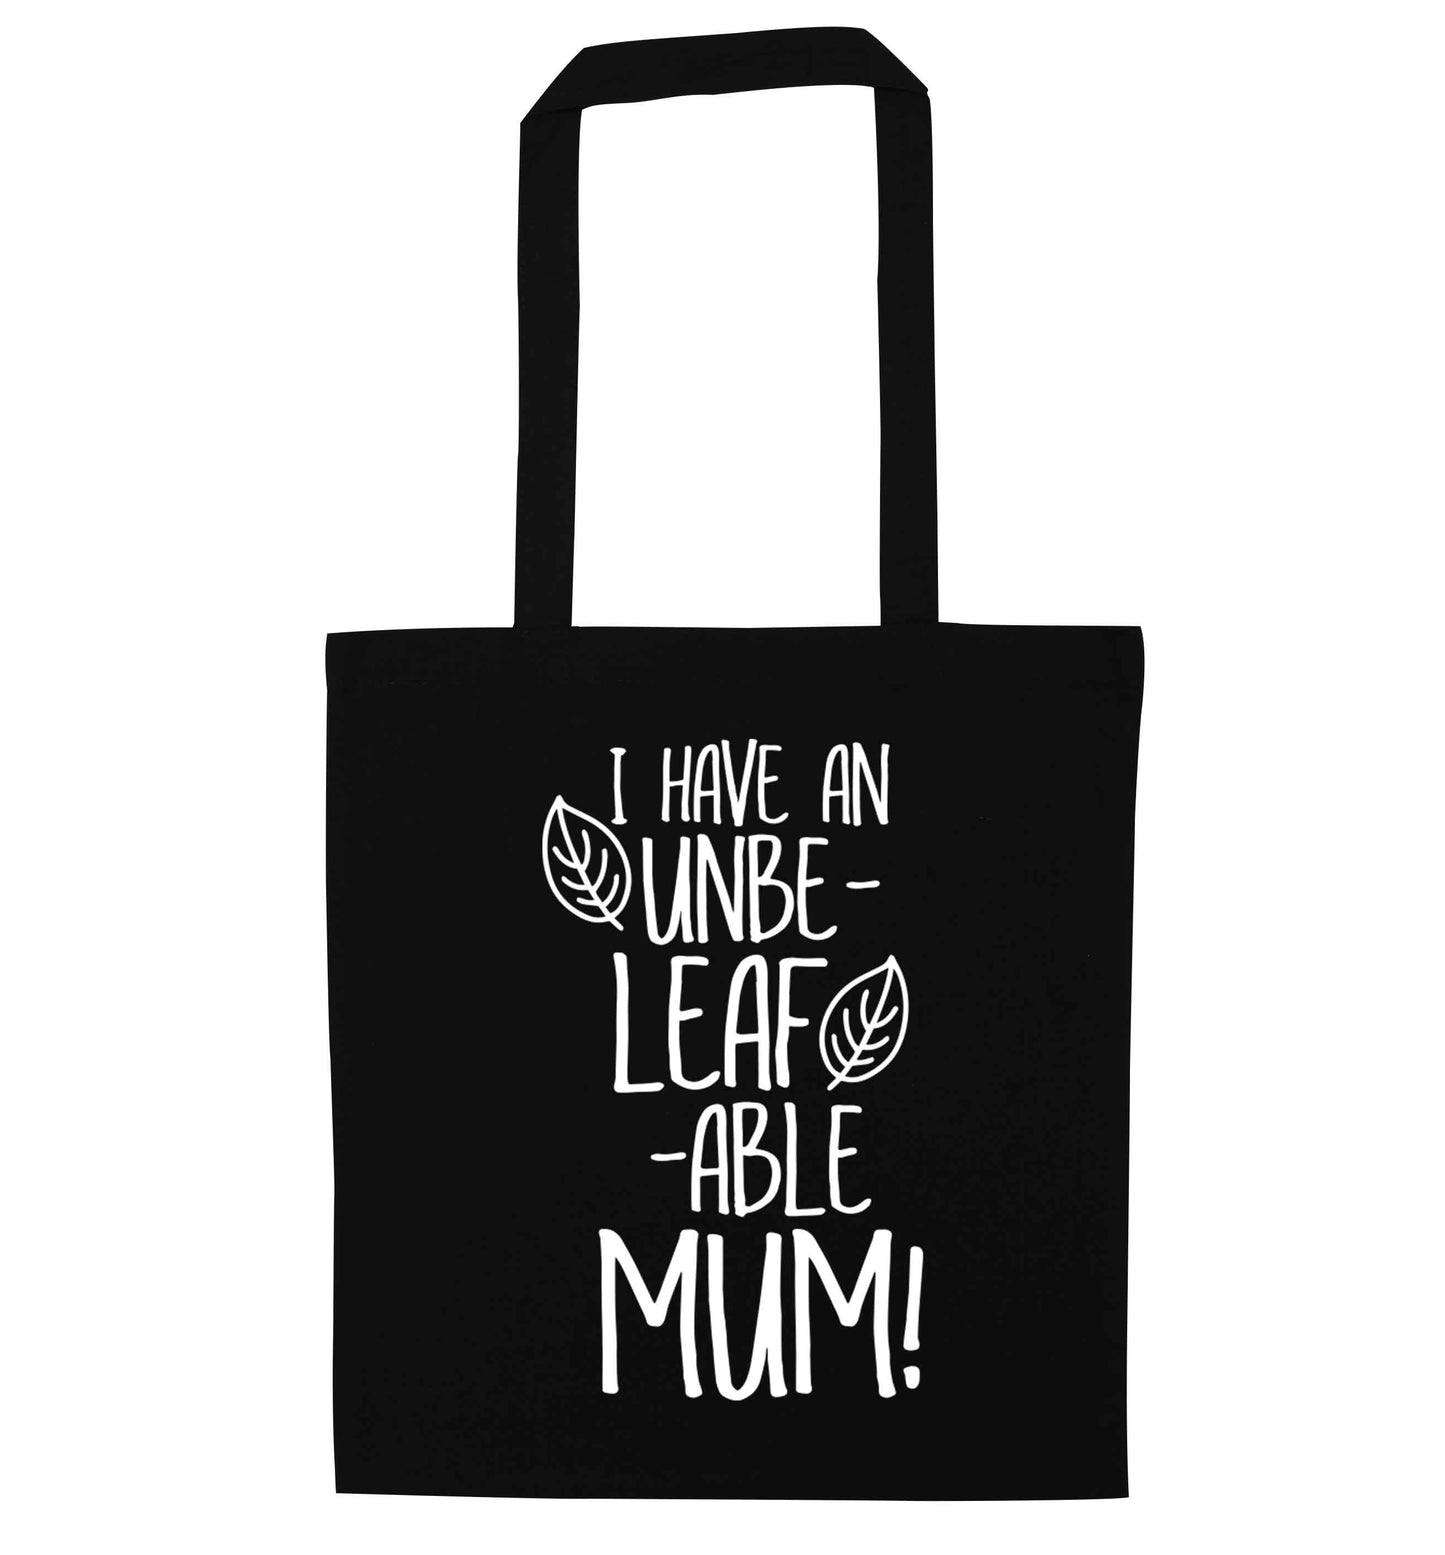 I have an unbeleafable mum! black tote bag